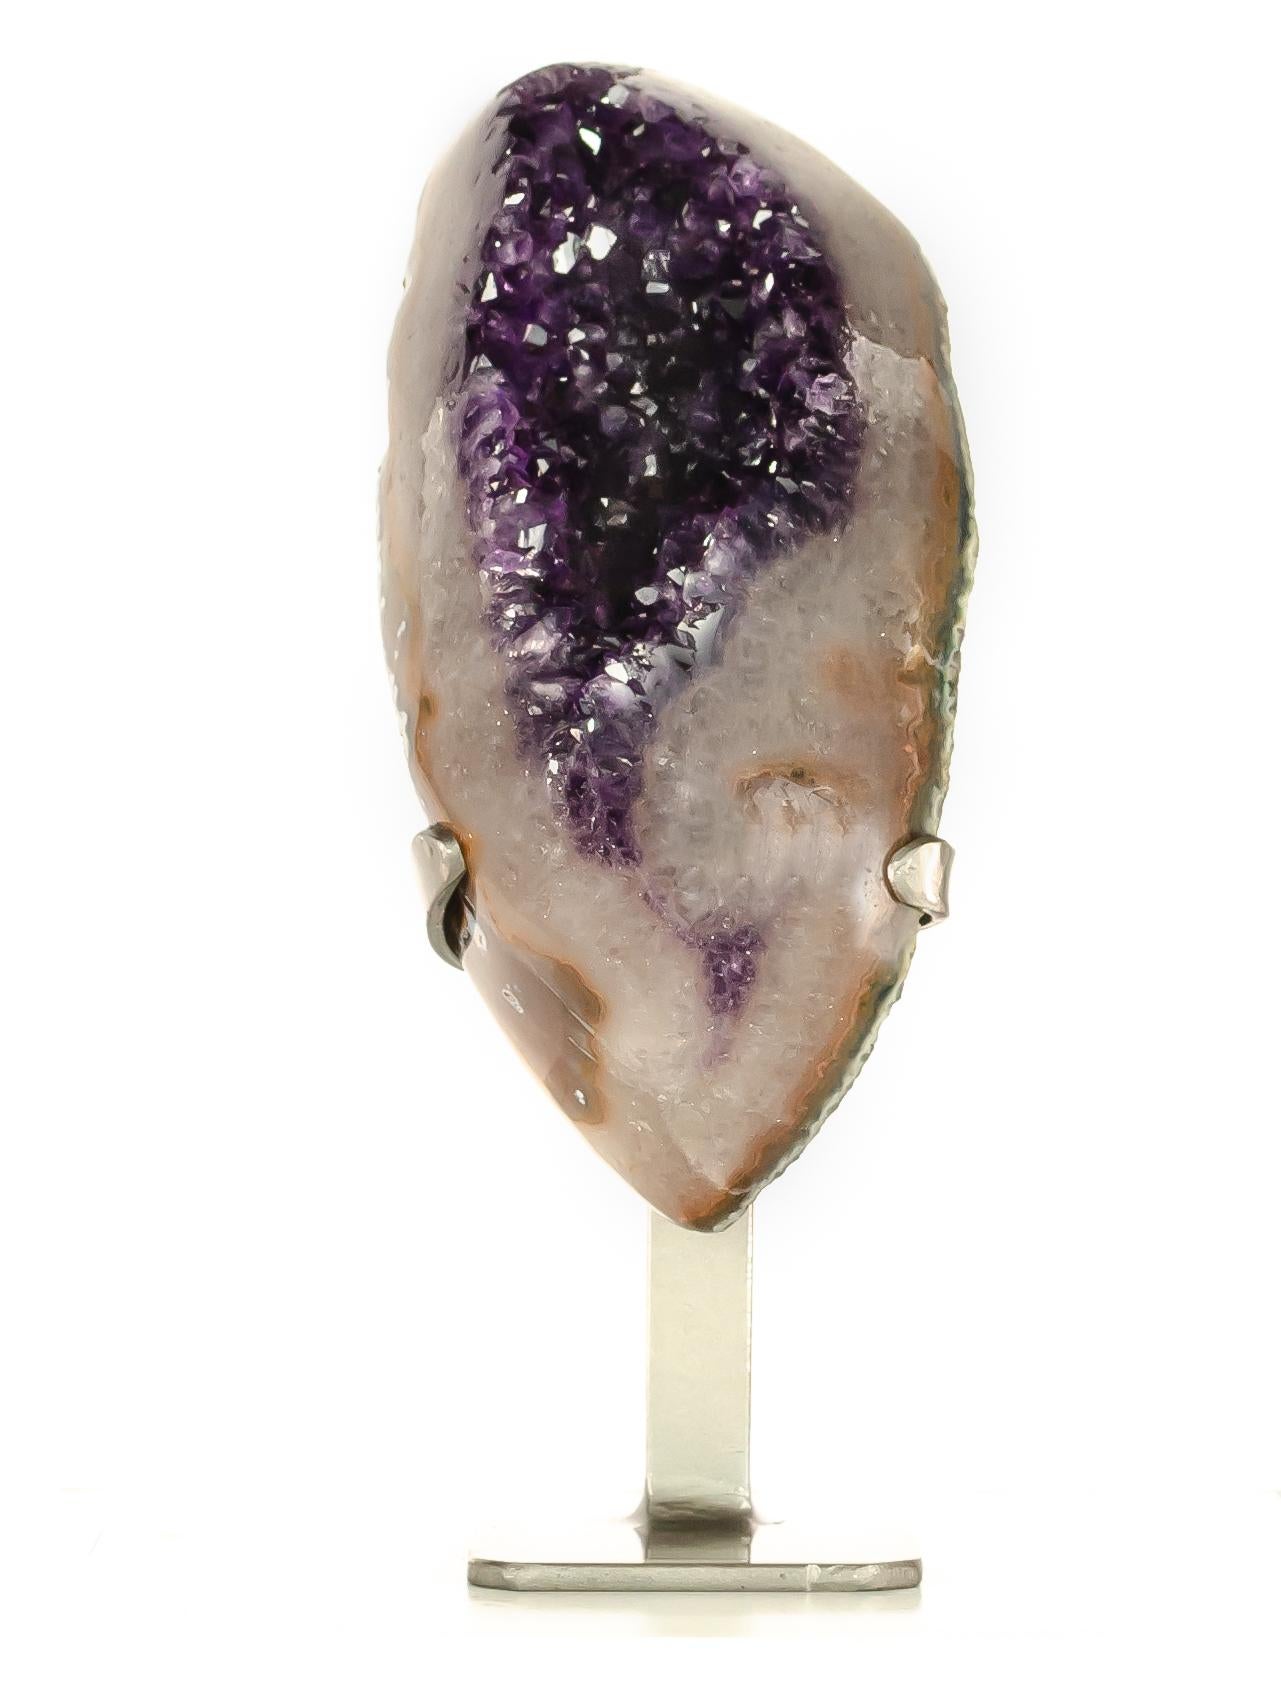 A pleasing crescentic section of quartz with agate areas, surrounding a beautiful vibrant streak of deep purple amethyst.

This crescentic medium sized section has a wonderful thick white quartz border
with an intense purple amethyst core.